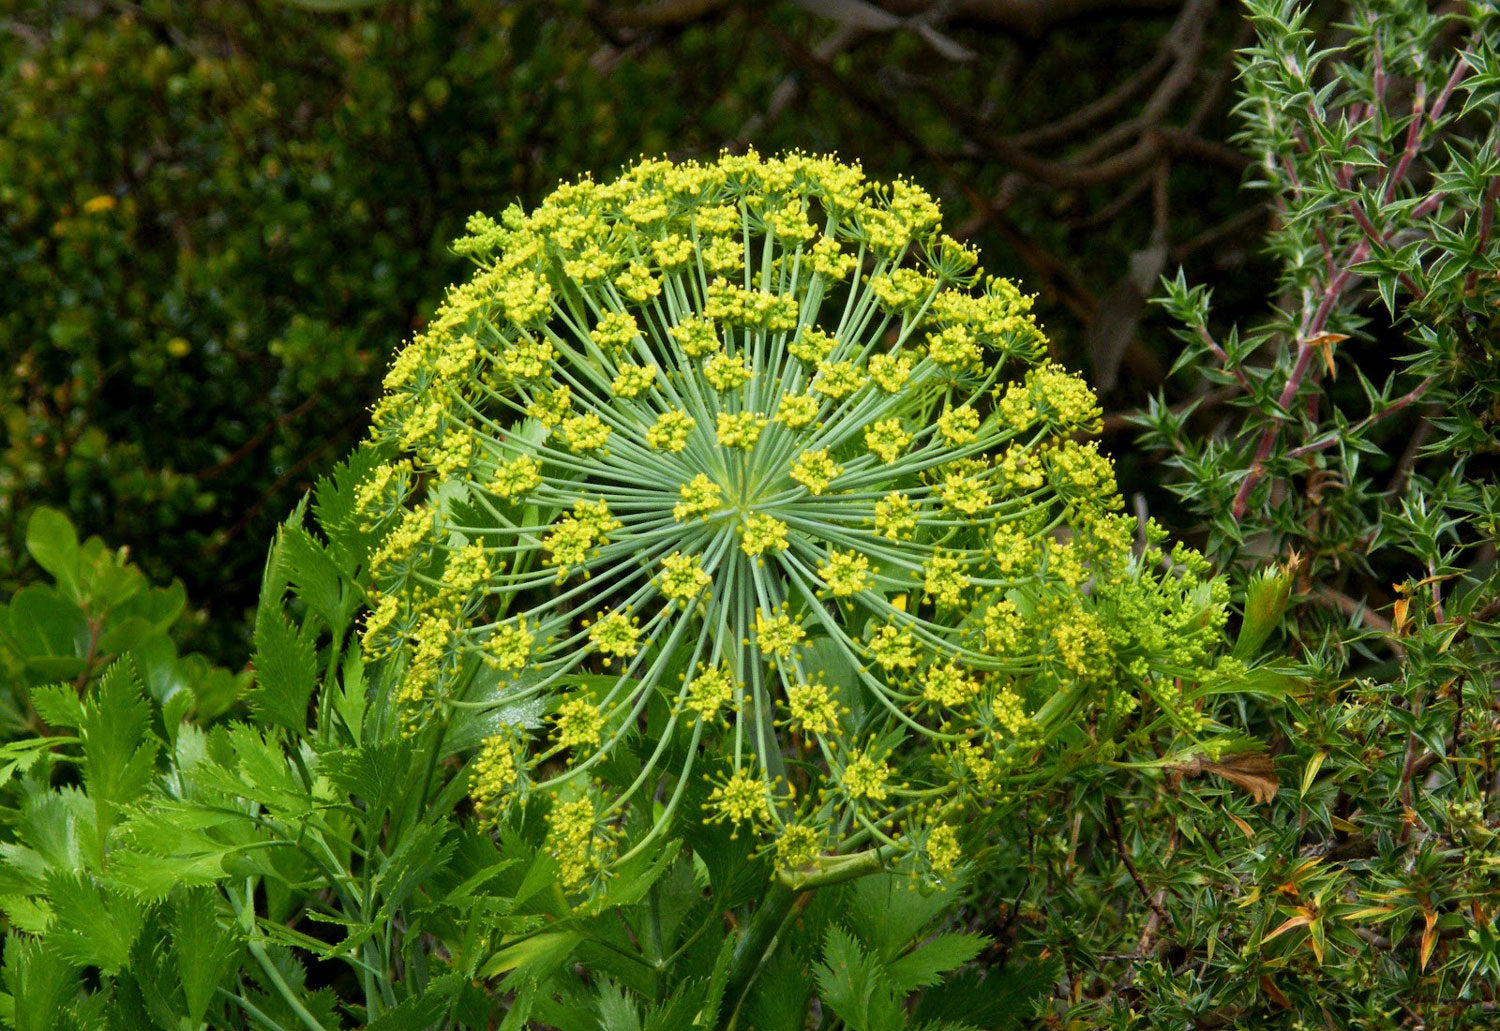 What Does Galbanum Smell Like?